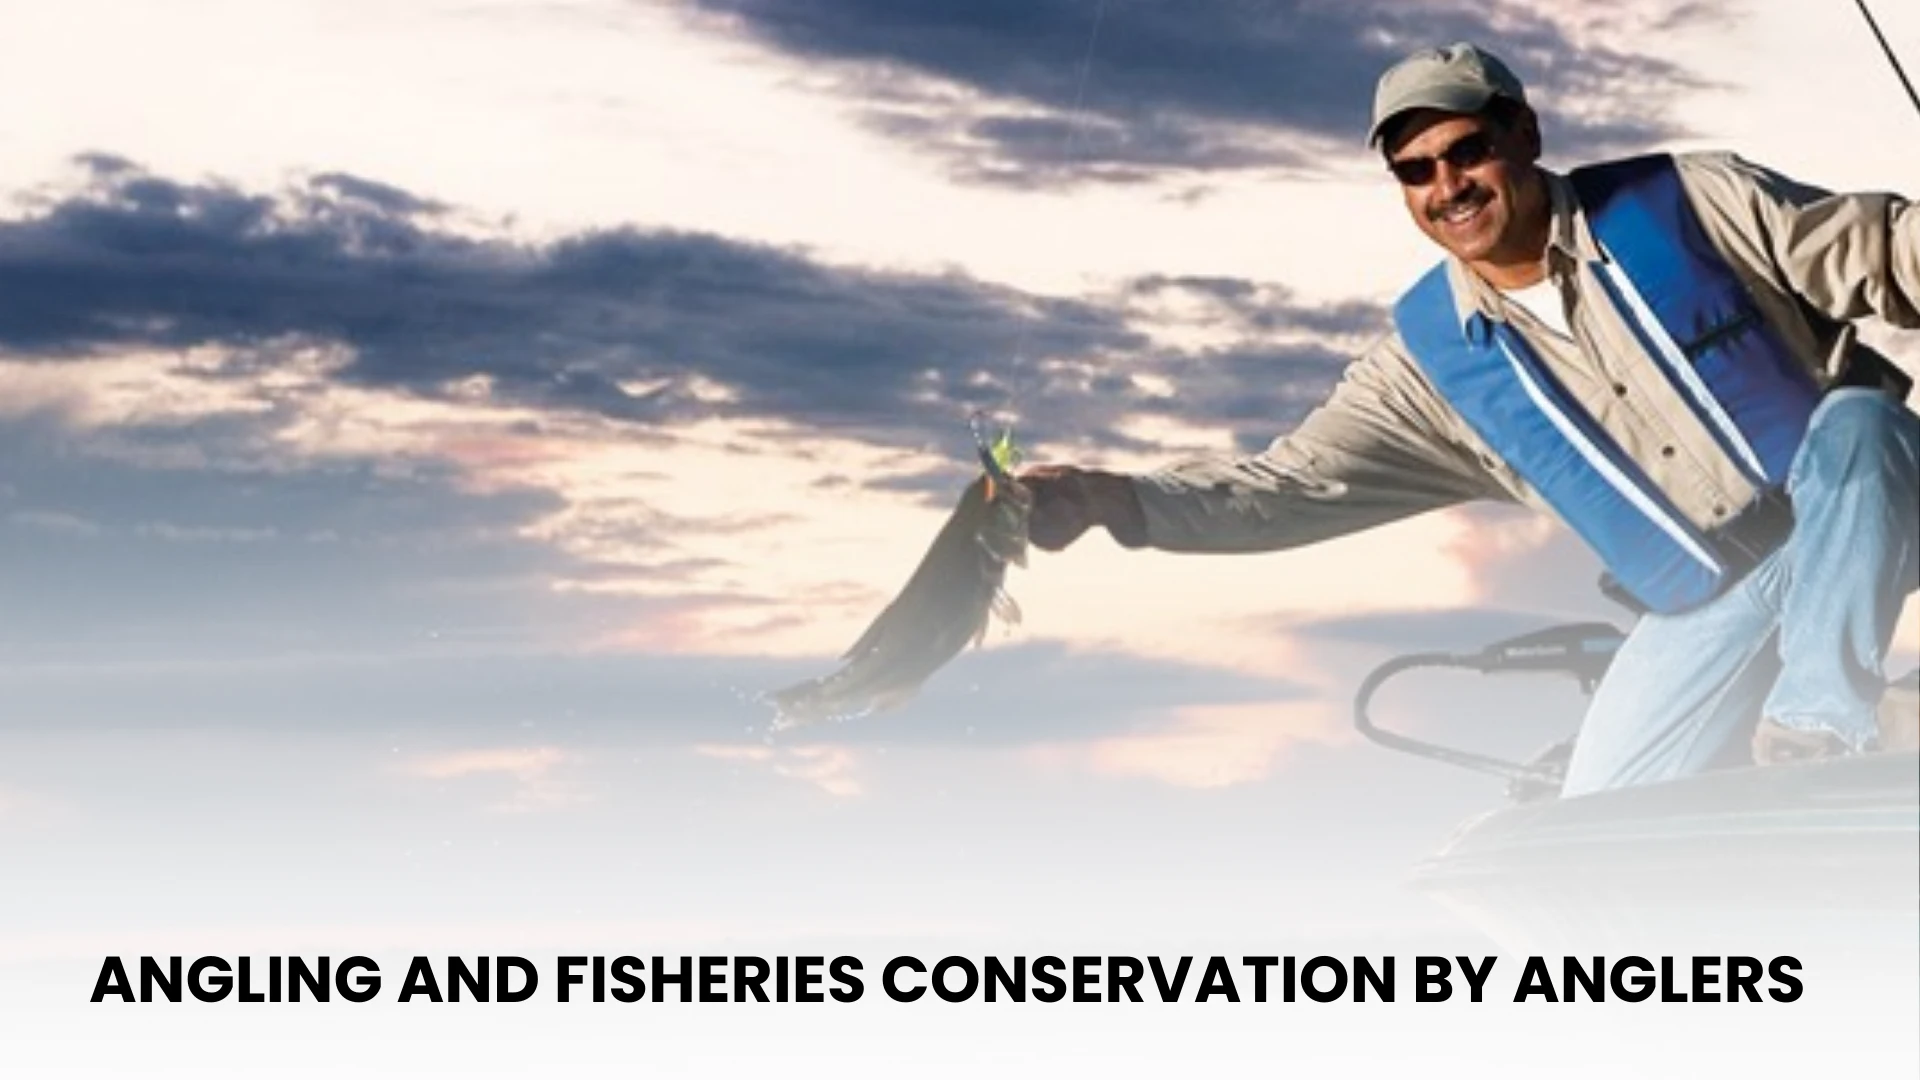 Angling and Fisheries Conservation by Anglers